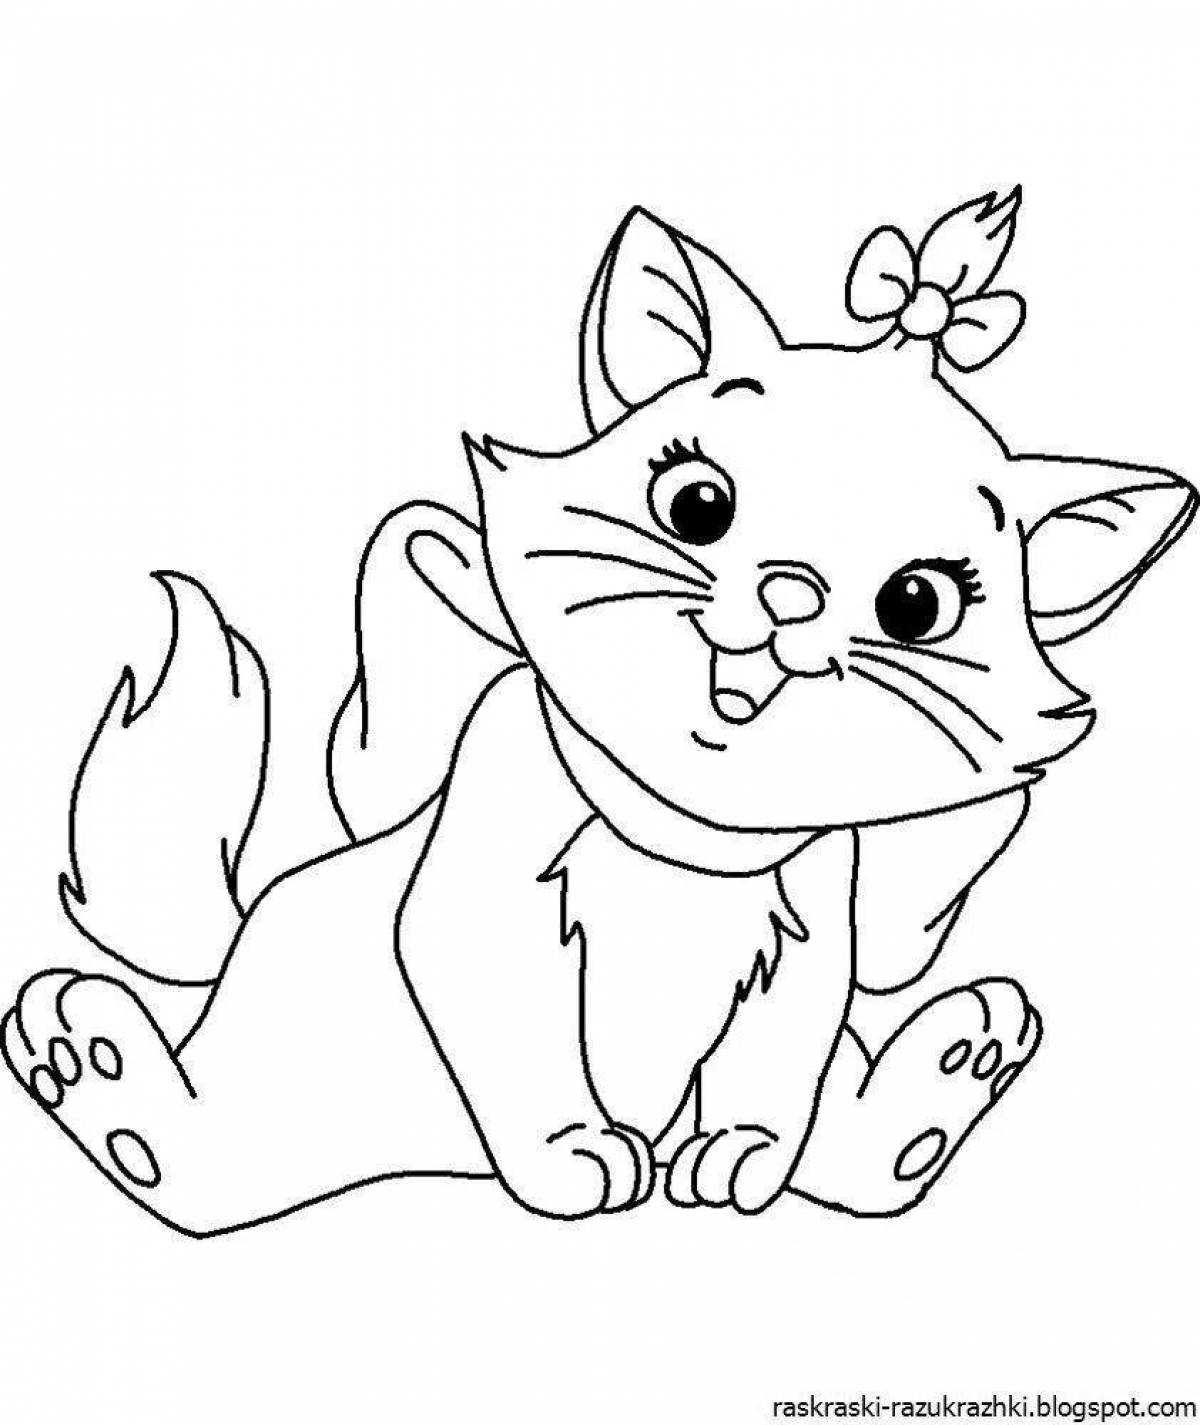 Joyful coloring for children 6-7 years old cats